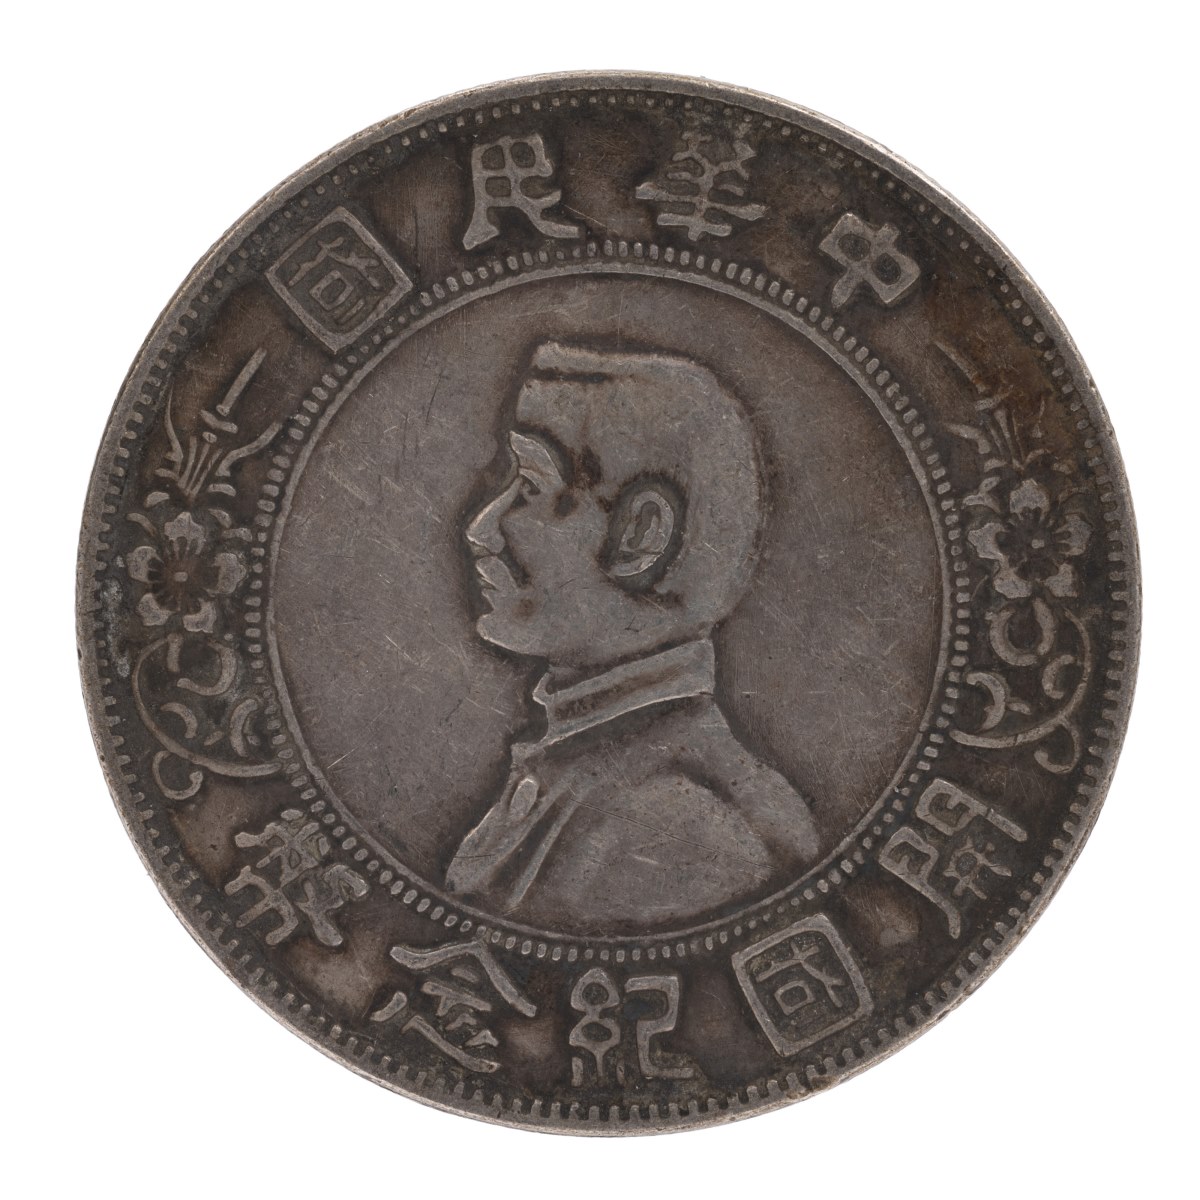 Memento Birth of Republic of China One Dollar Coin